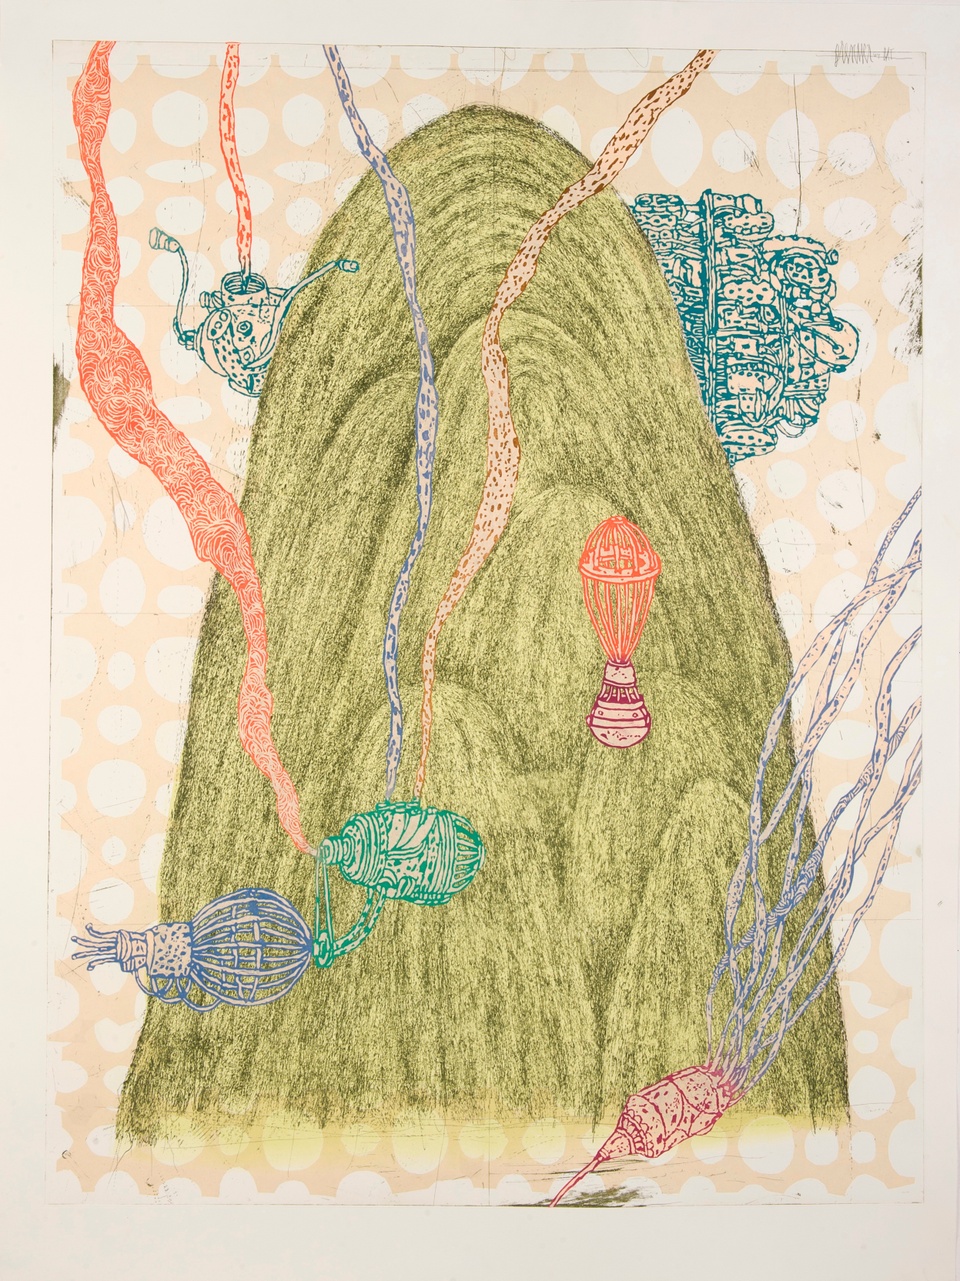 print of a green mountain with multicolored zeppelins around it